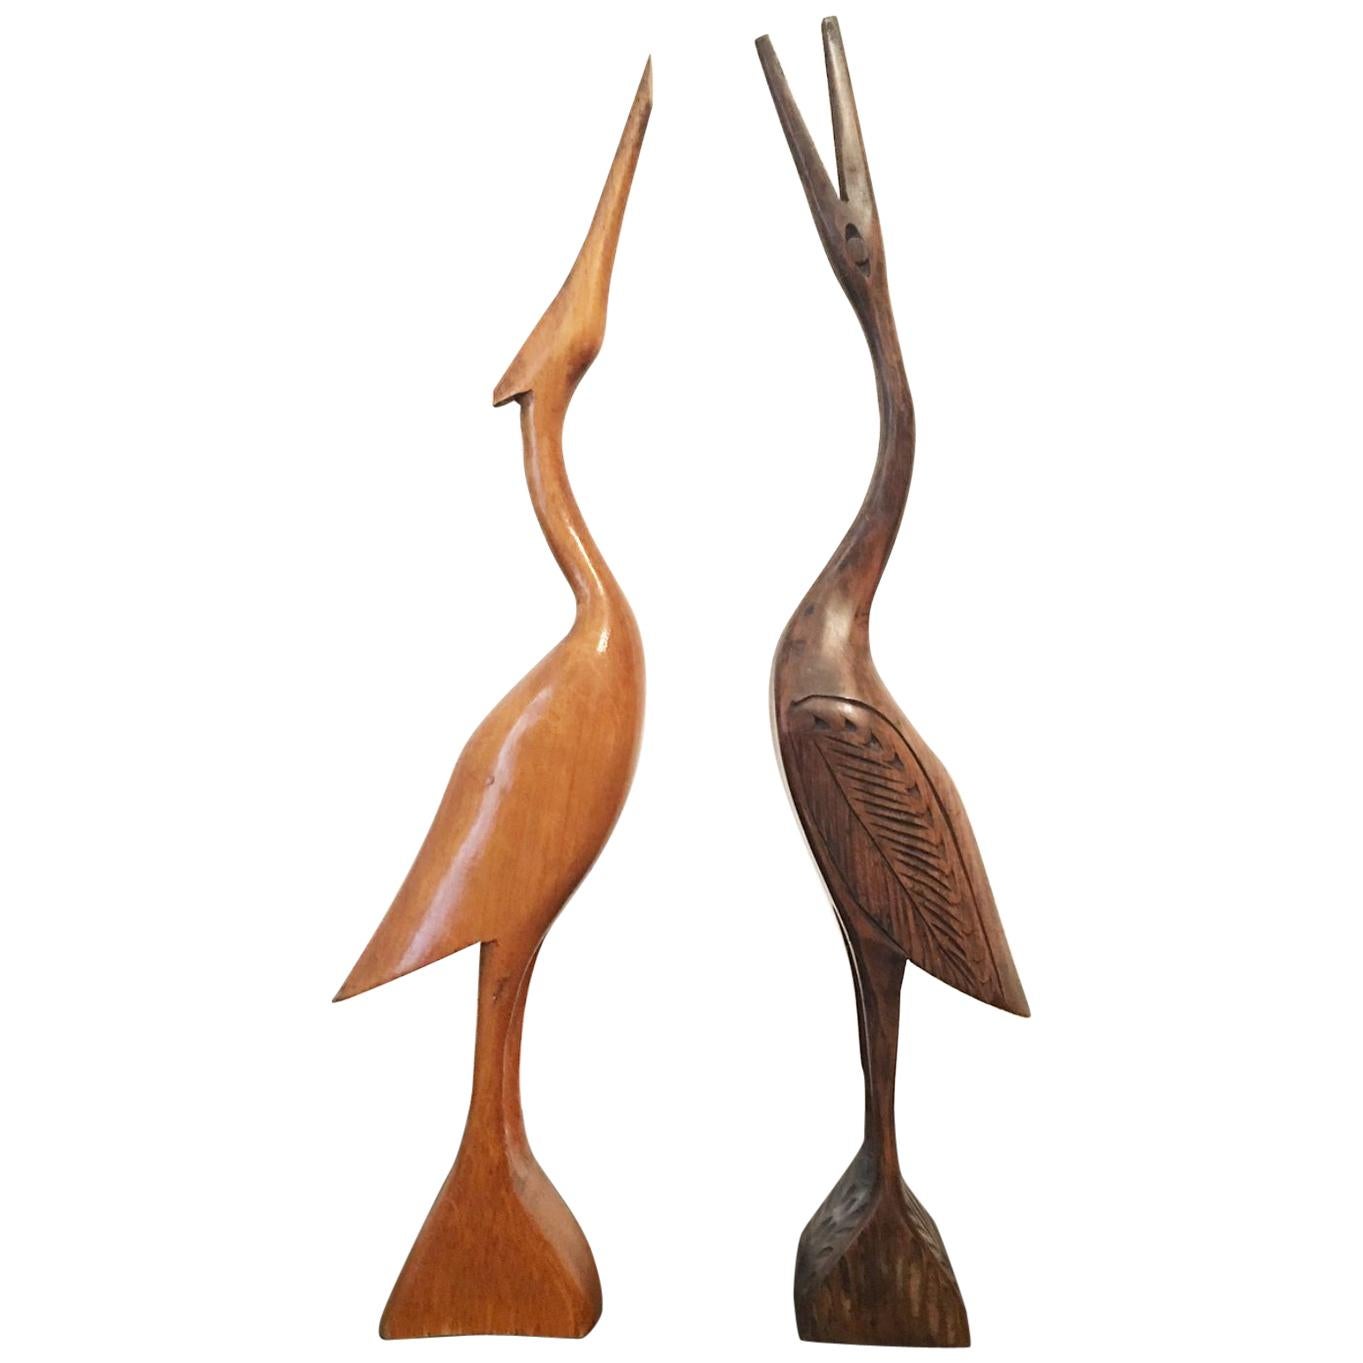 Herons, Two Wooden Statues